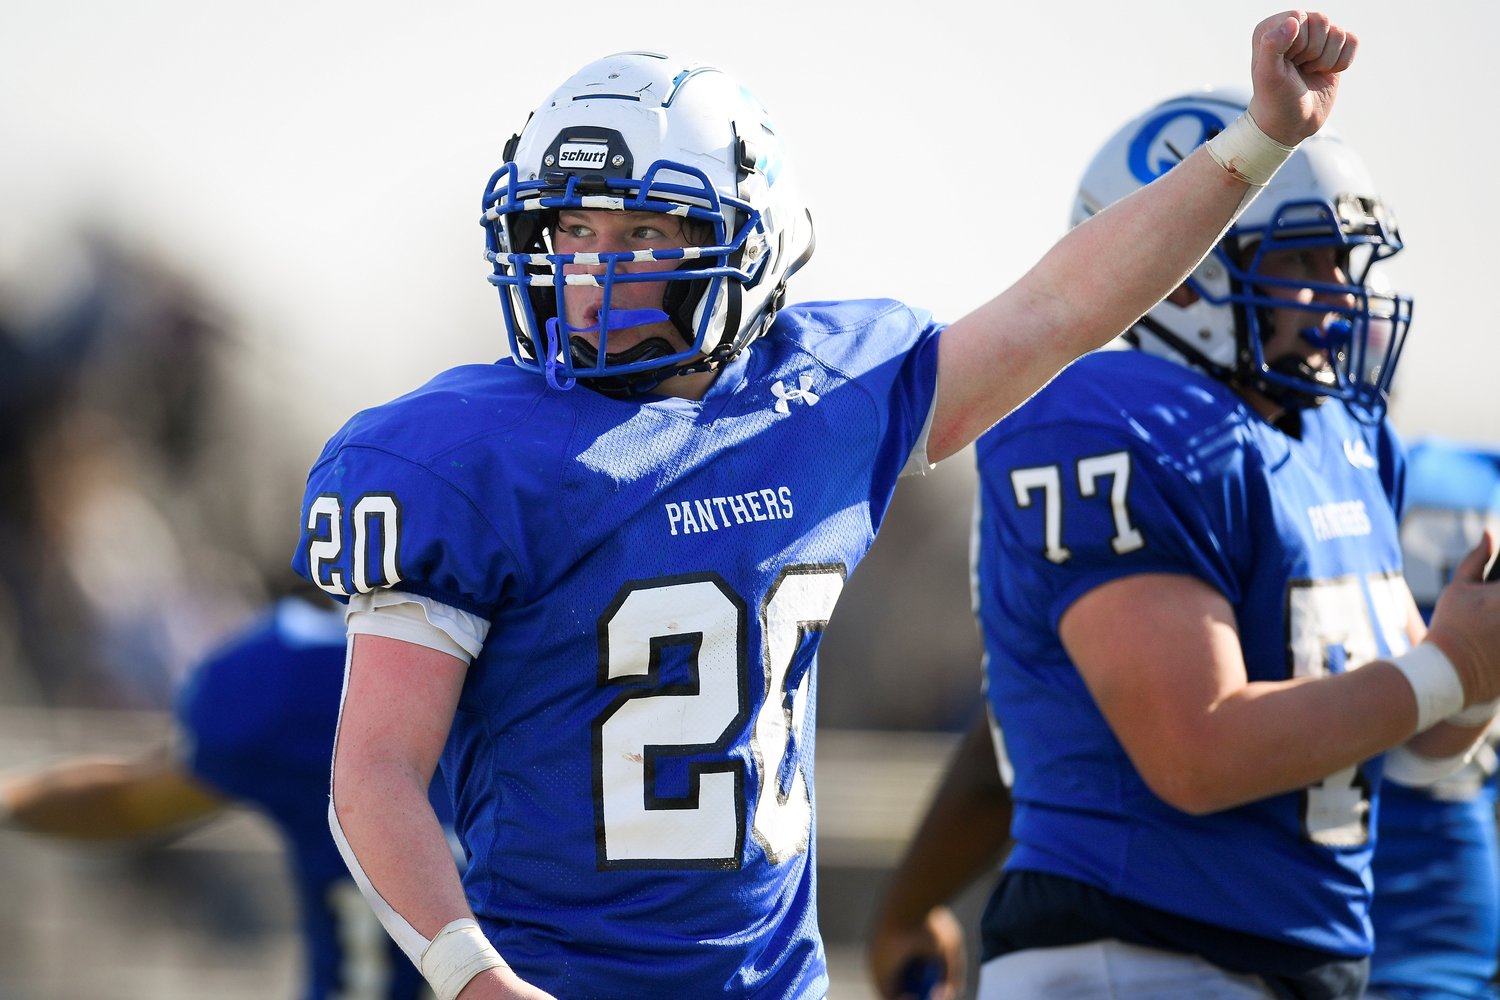 Quakertown’s Gavin Carroll celebrates after the Panthers score their second TD of the game.